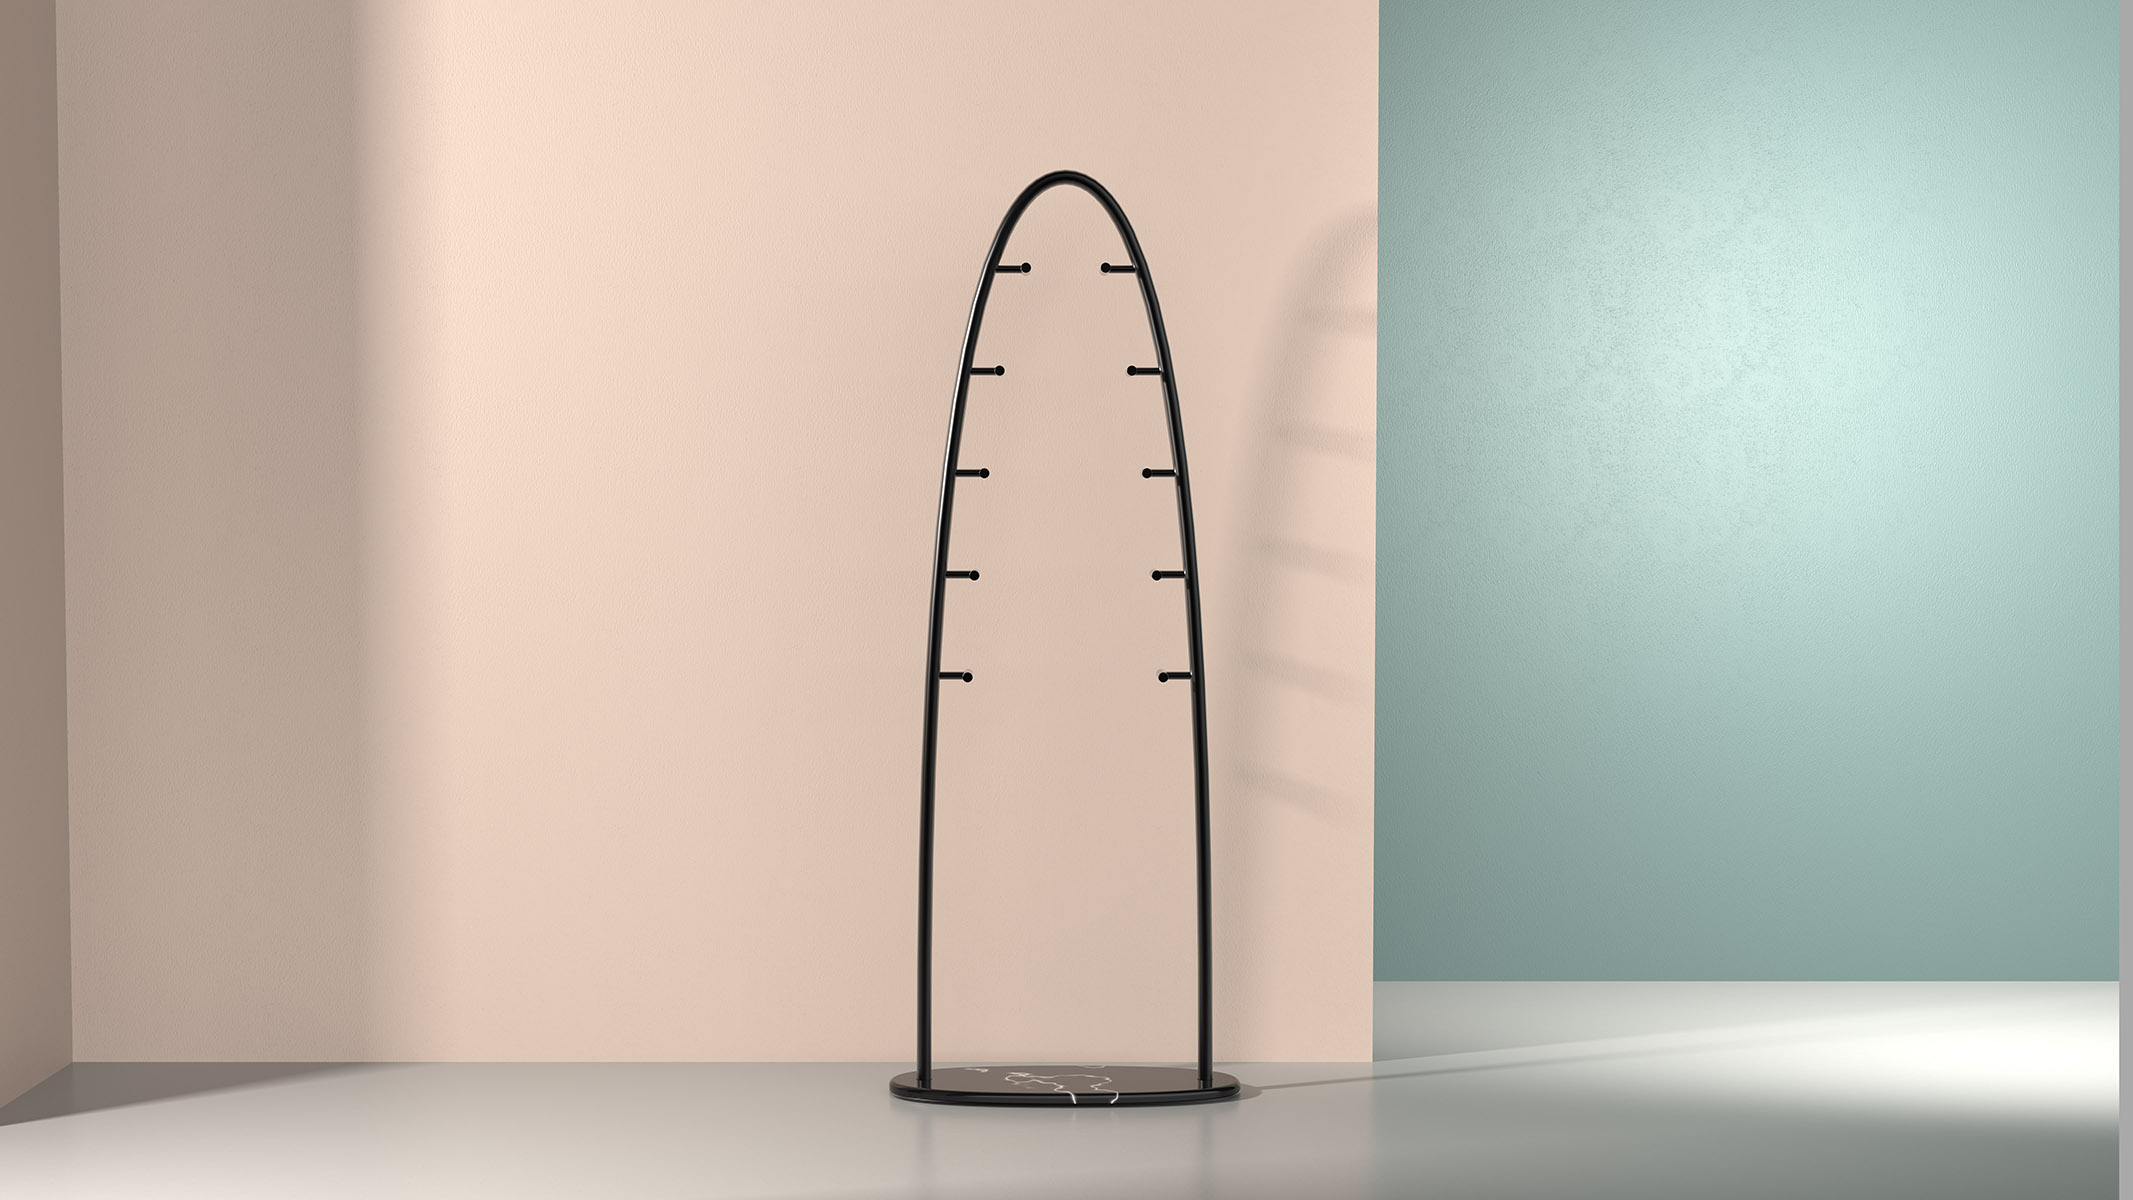 Mary_Coat_Rack_designed_by_molenore_1200x2133px_1